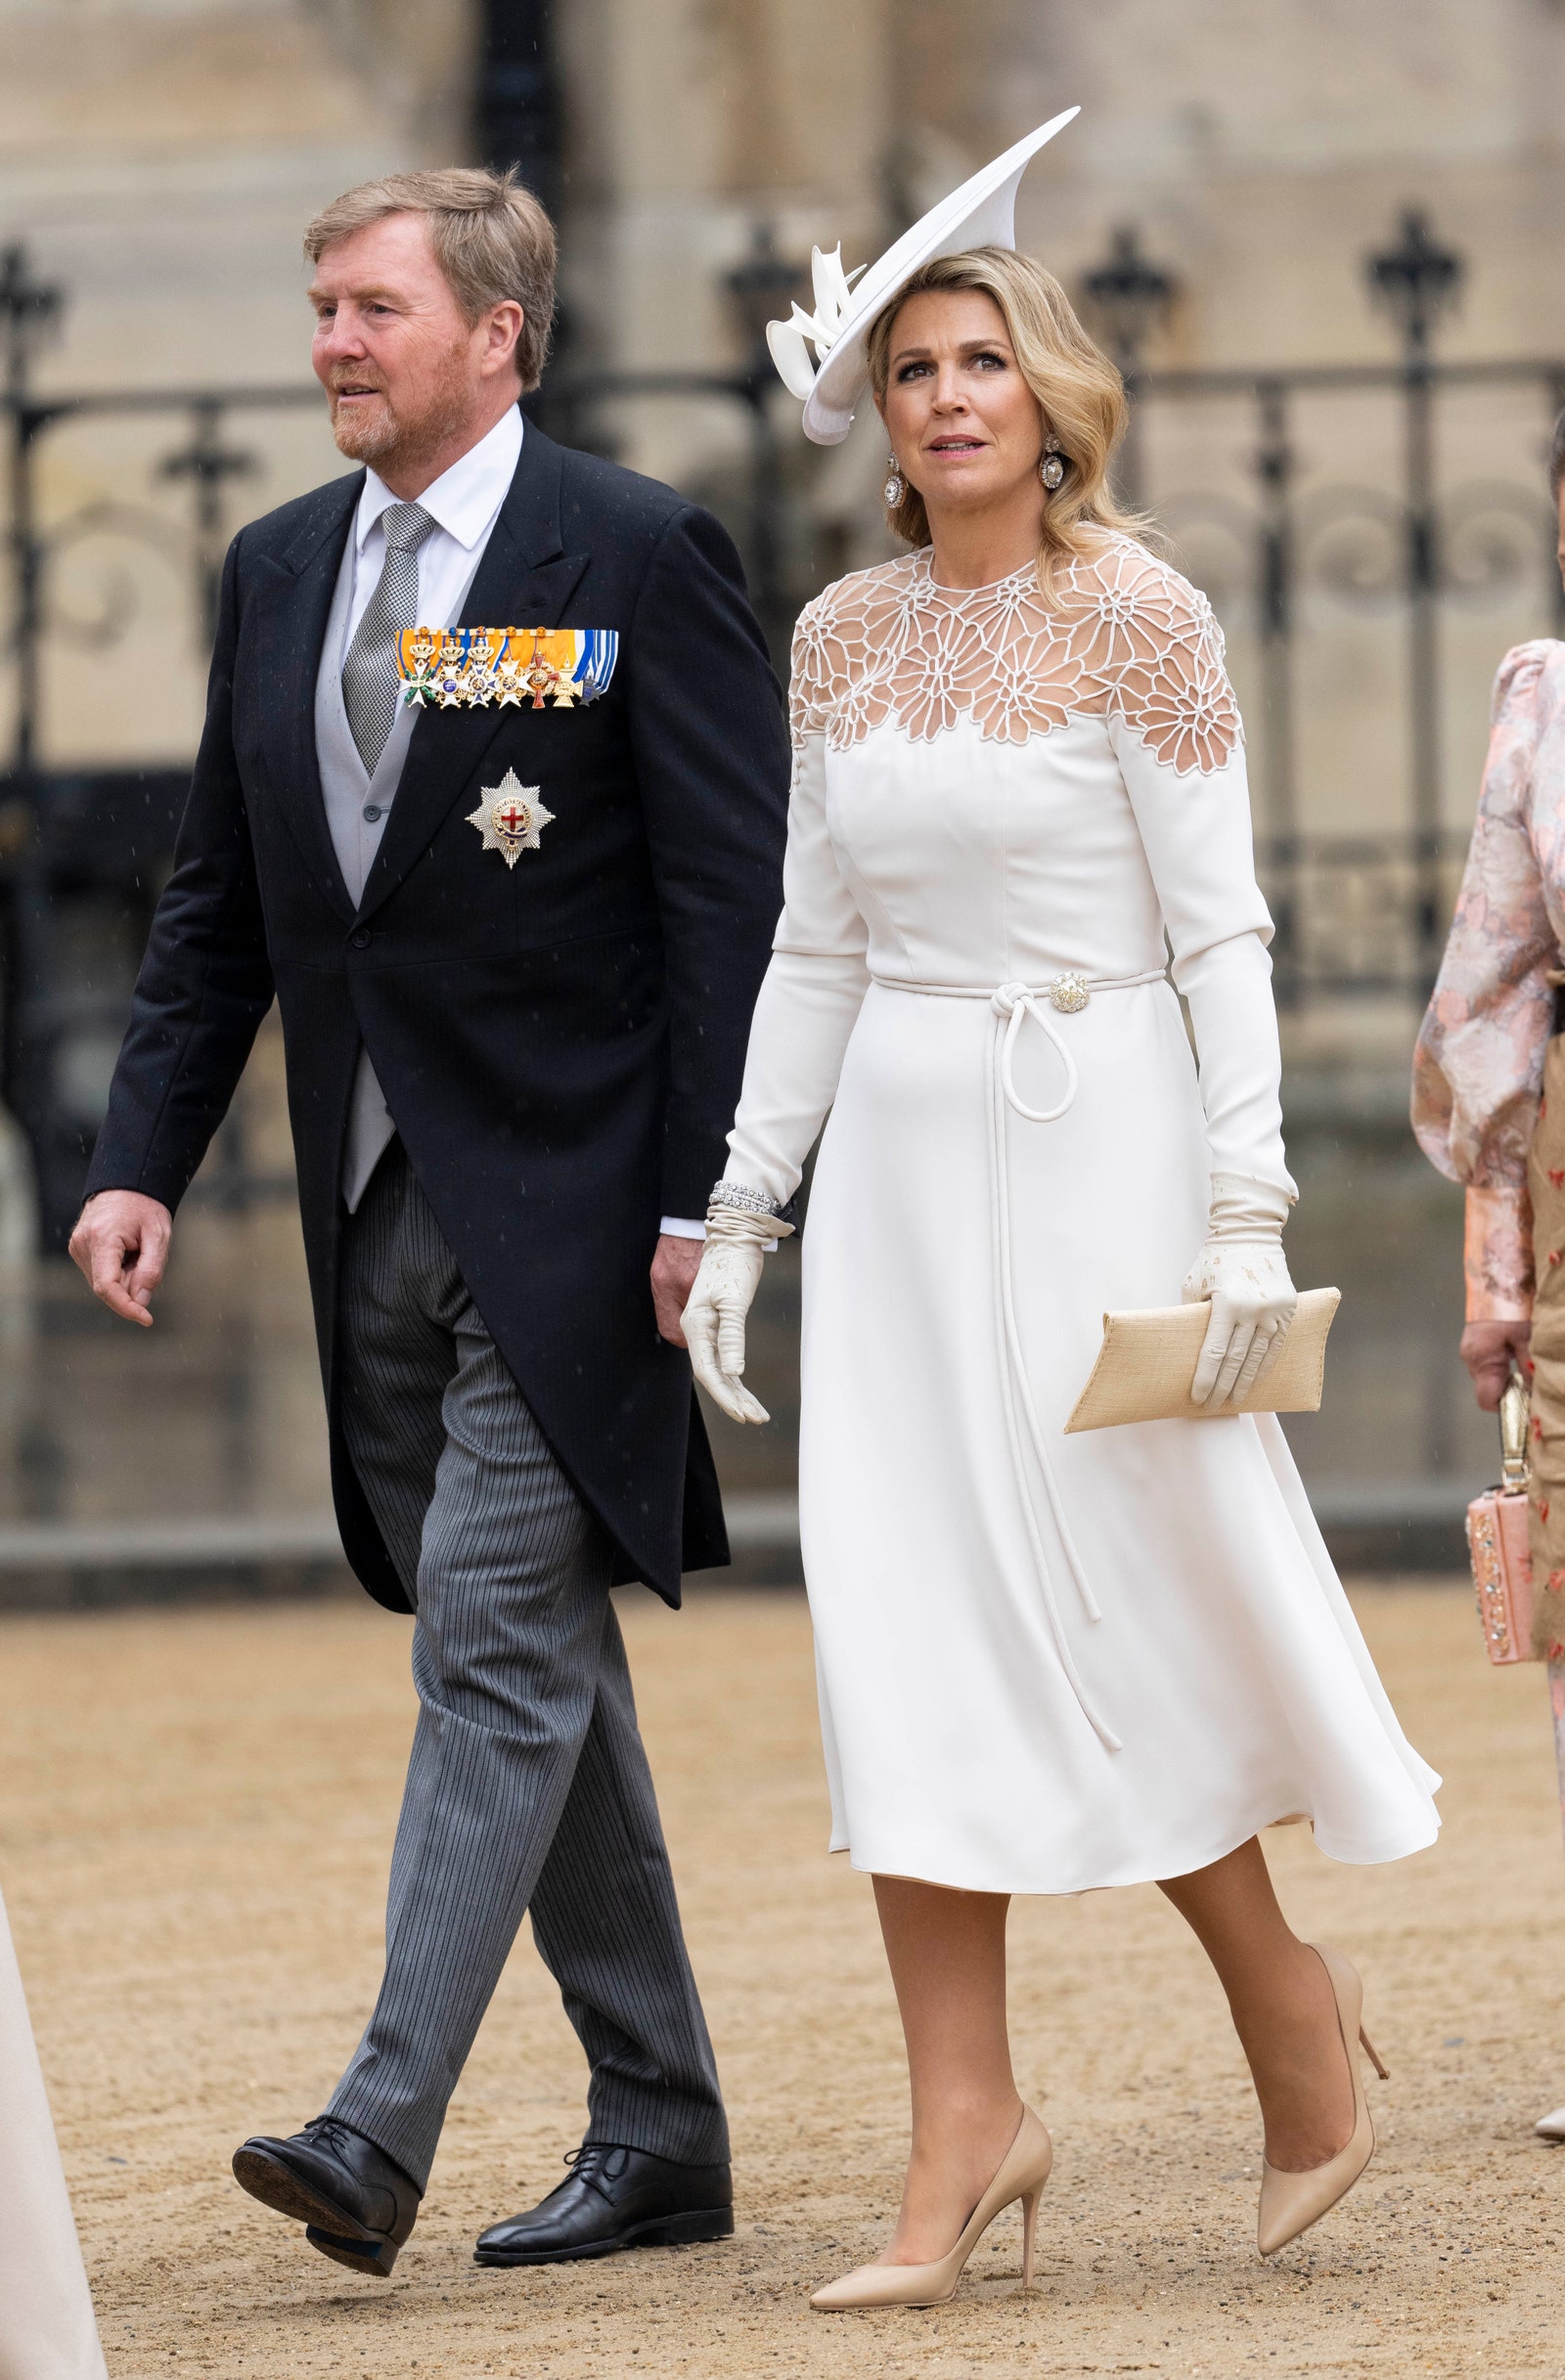 King Willem-Alexander and Queen Máxima of the Netherlands